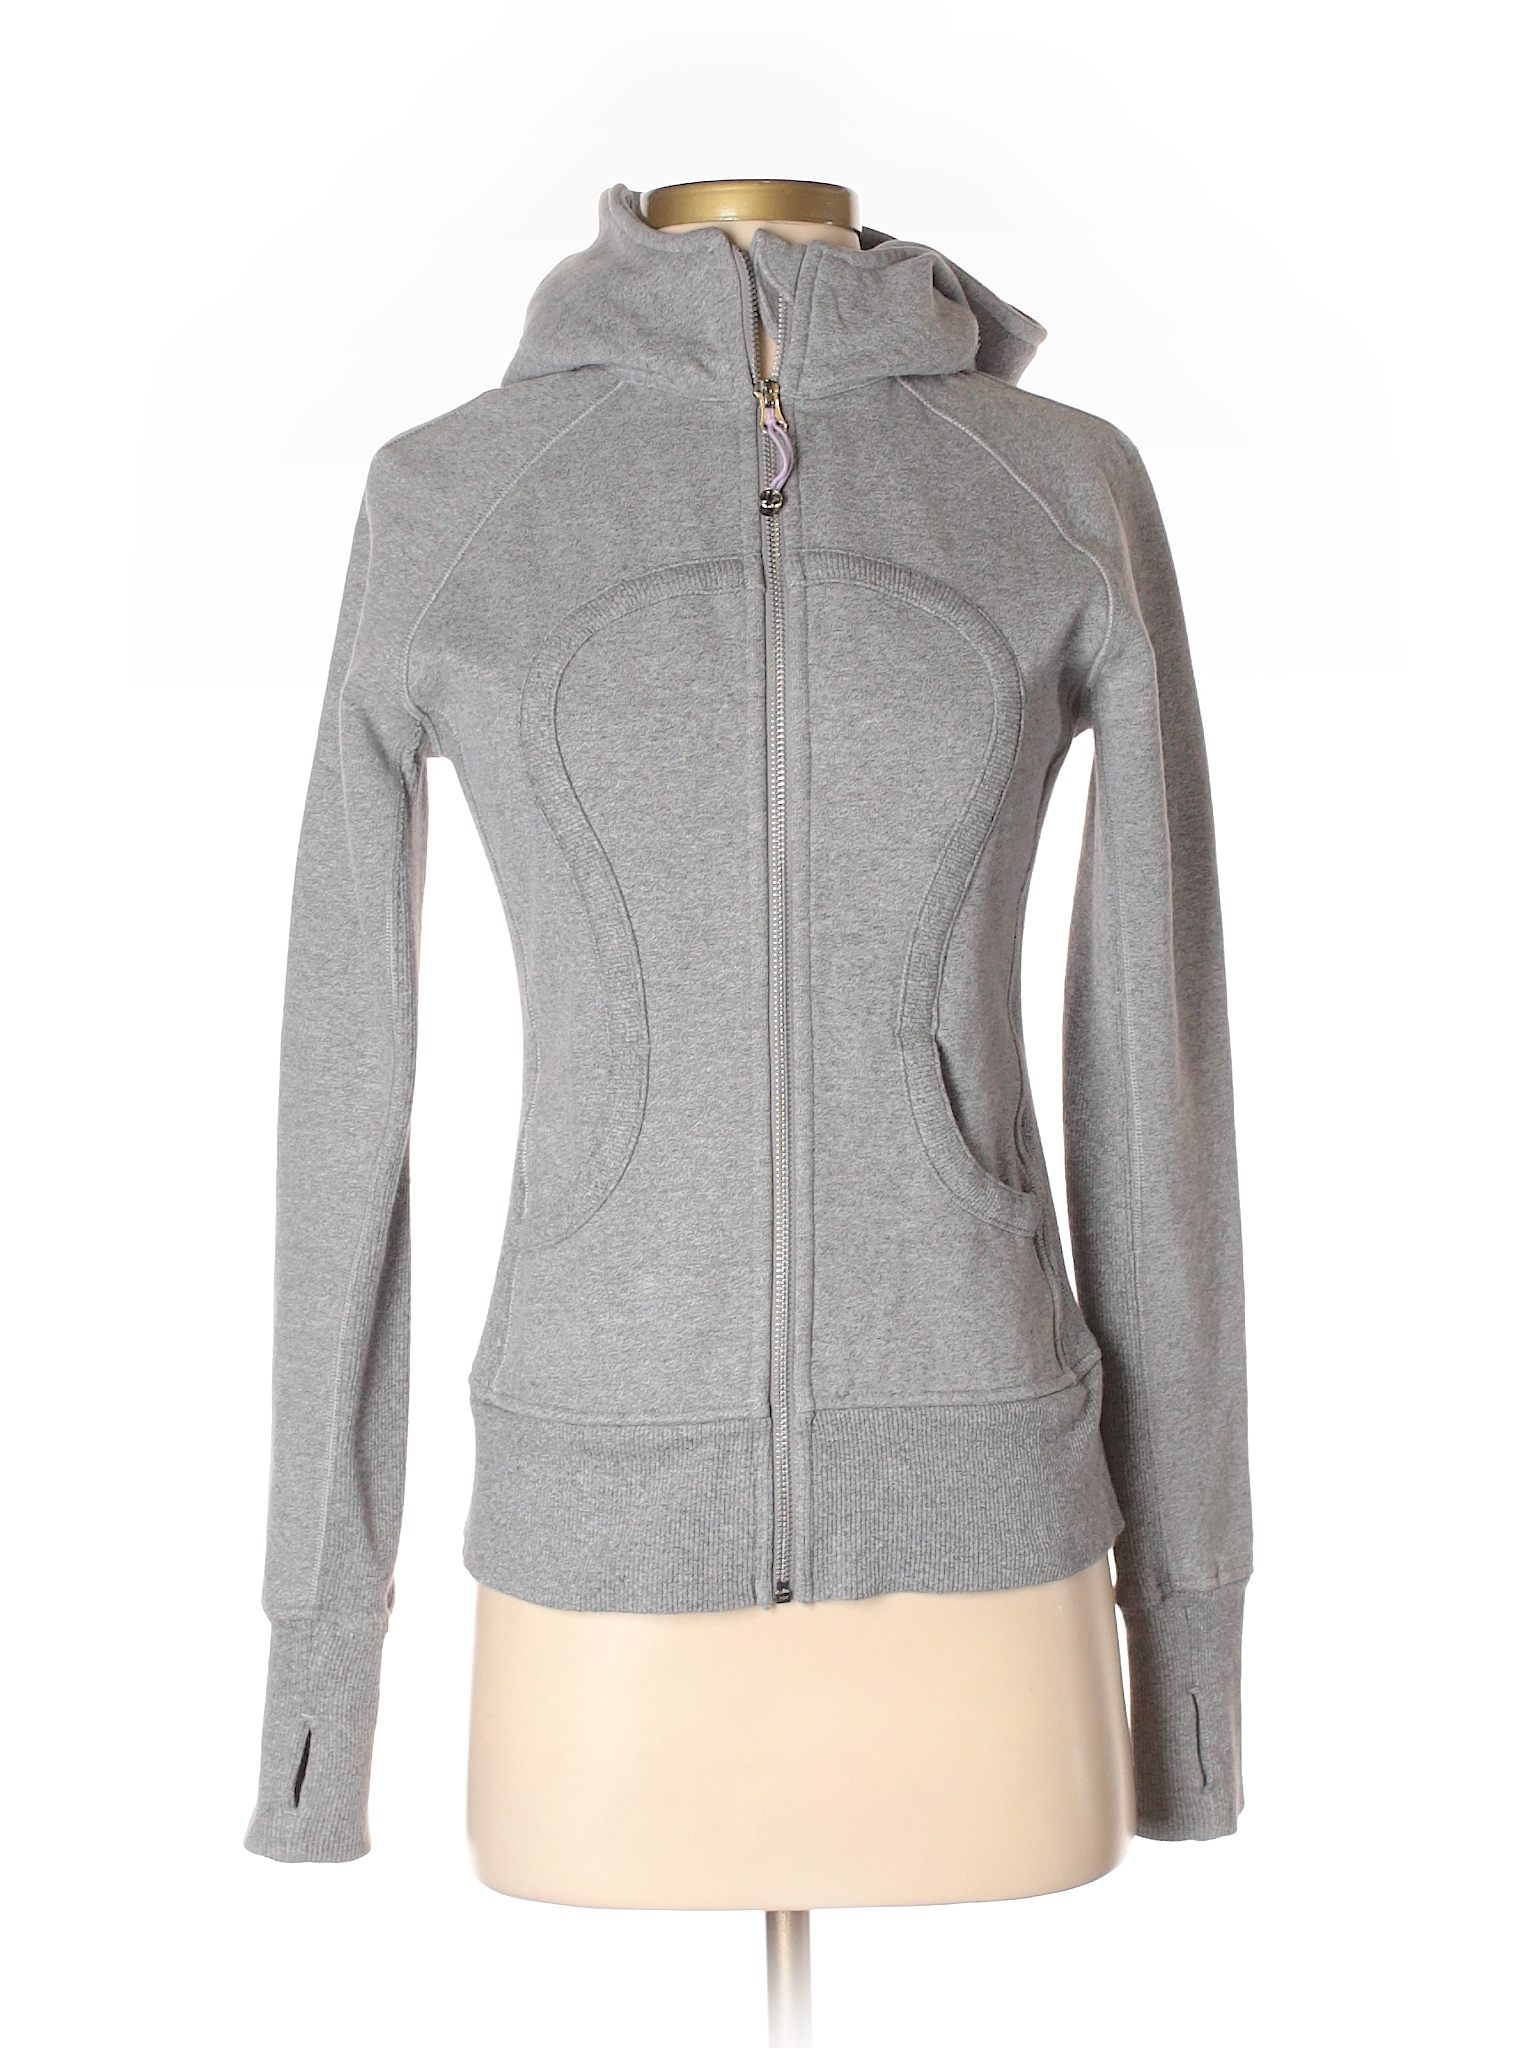 Lululemon Athletica Solid Gray Zip Up Hoodie Size 4 - 74% off